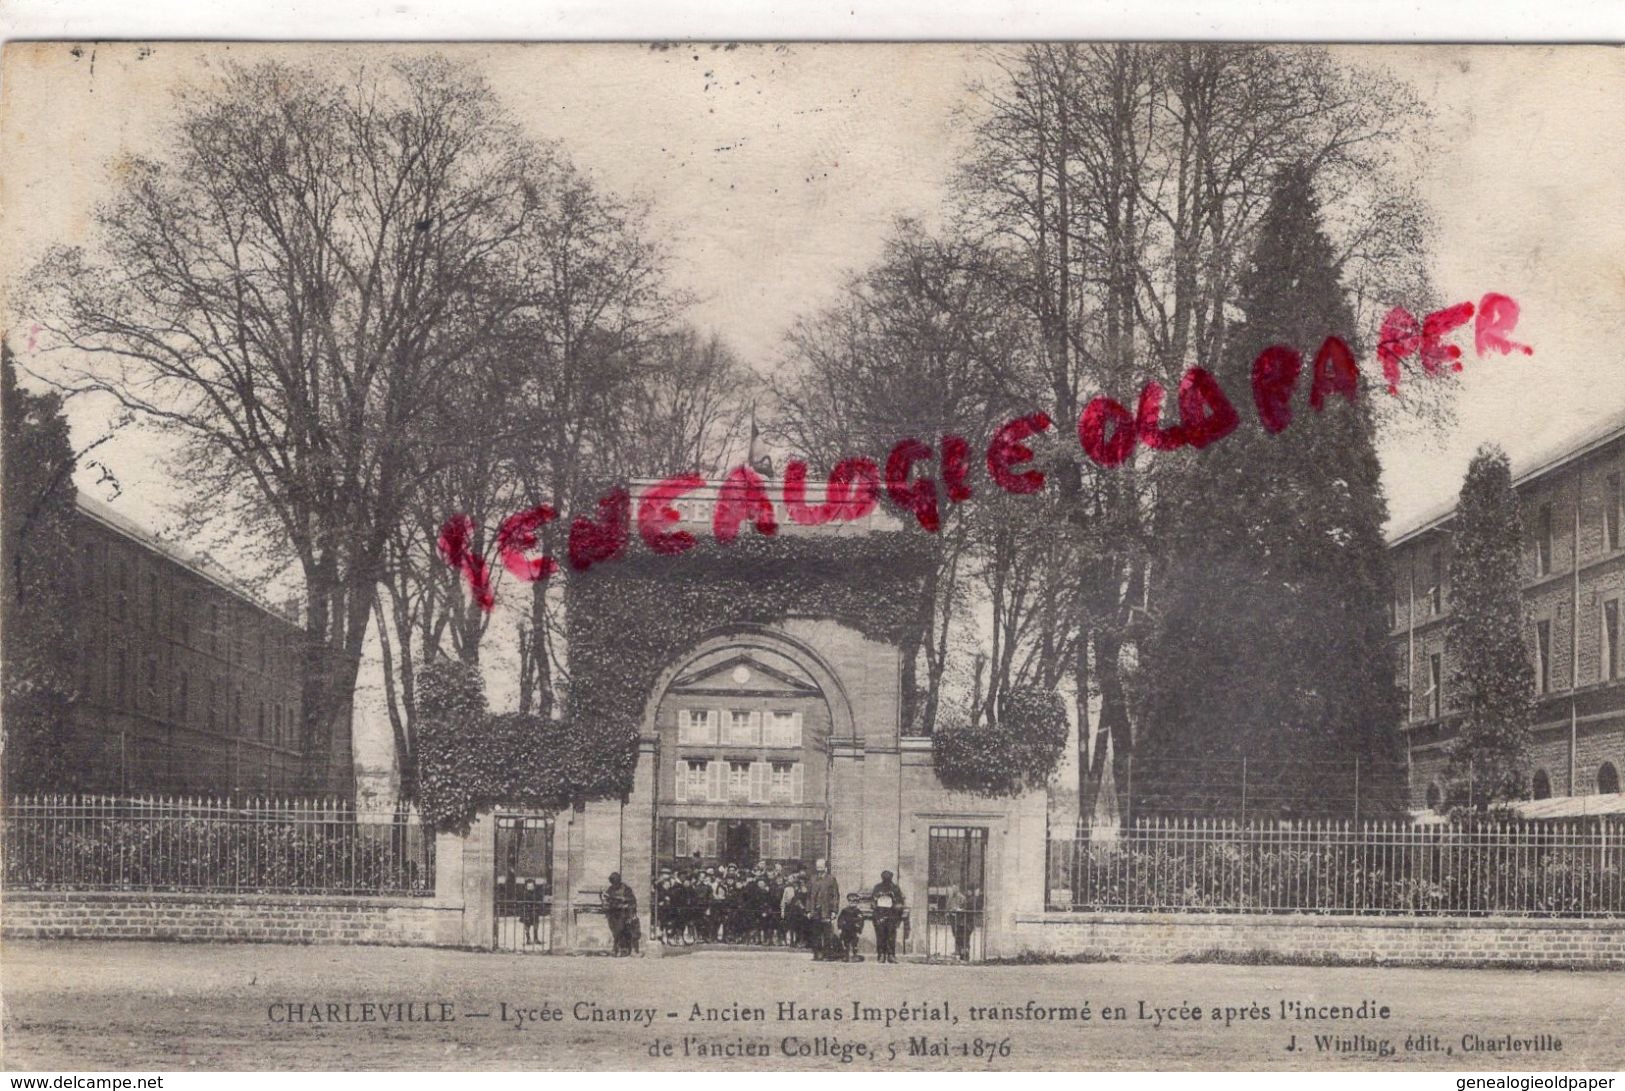 08 - CHARLEVILLE - LYCEE CHANZY  ANCIEN HARAS IMPERIAL TRANSFORME EN LYCEE APRES INCENDIE ANCIEN COLLEGE 5 MAI 1876 - Charleville